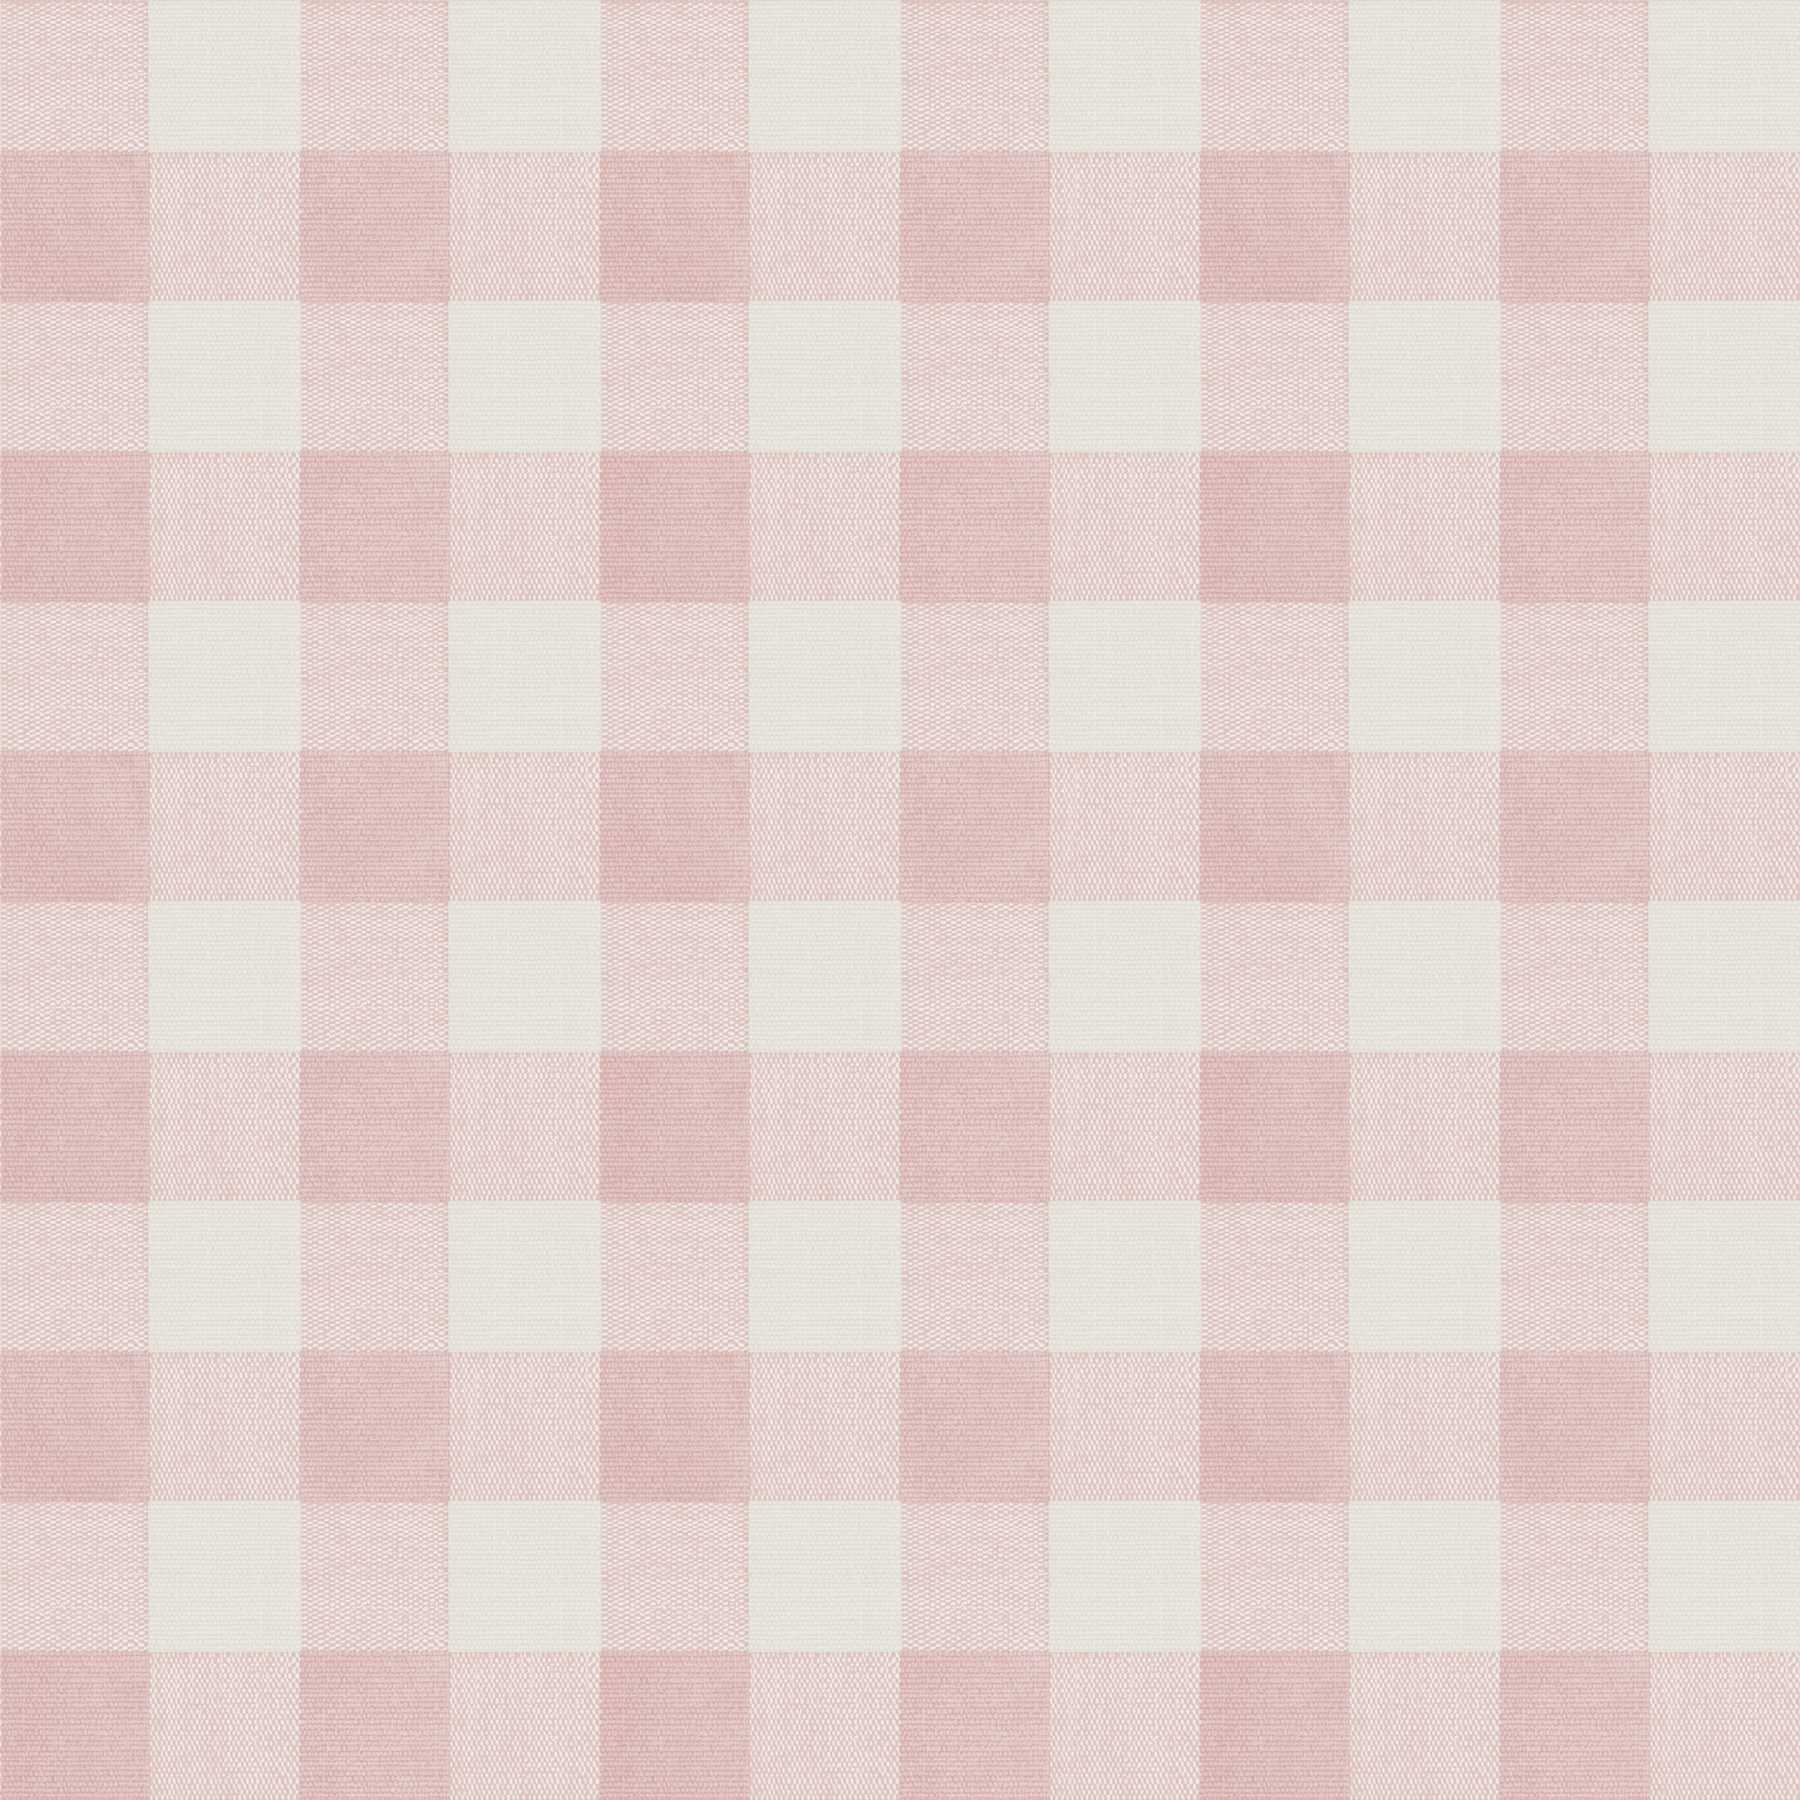 Pink Plaid Background Images HD Pictures and Wallpaper For Free Download   Pngtree